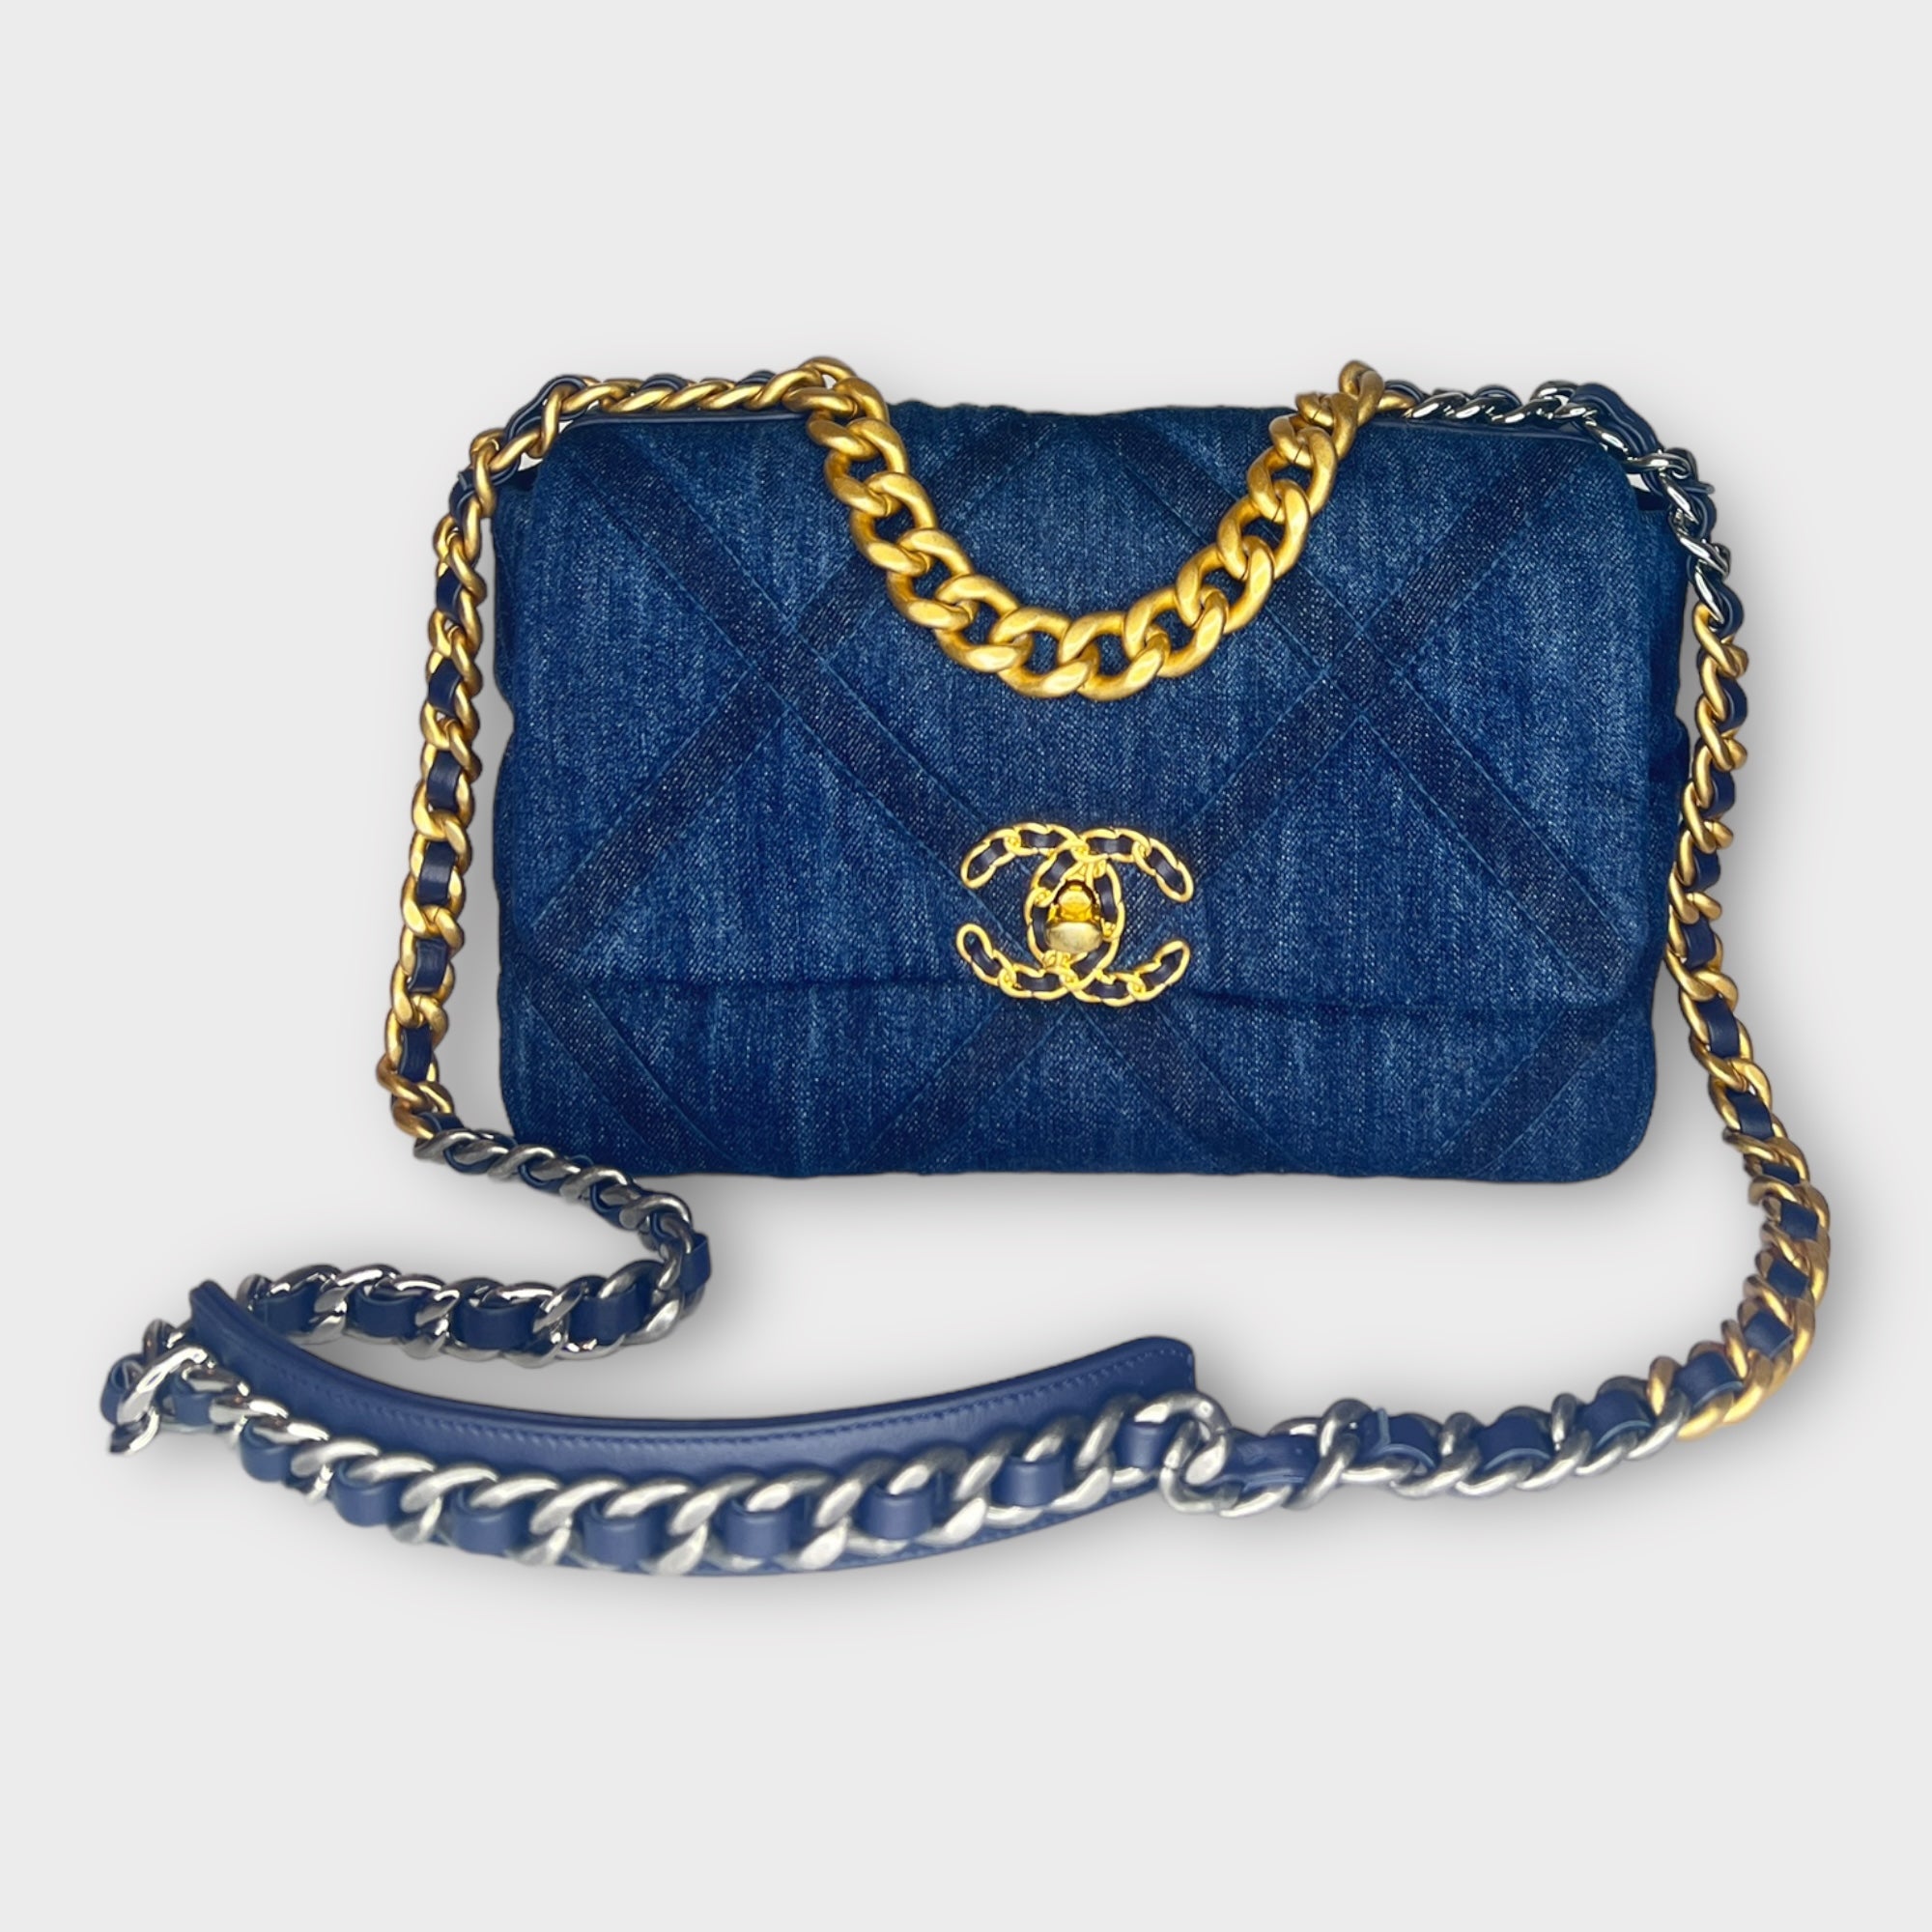 Denim Blue Small Bag with Gold hardware